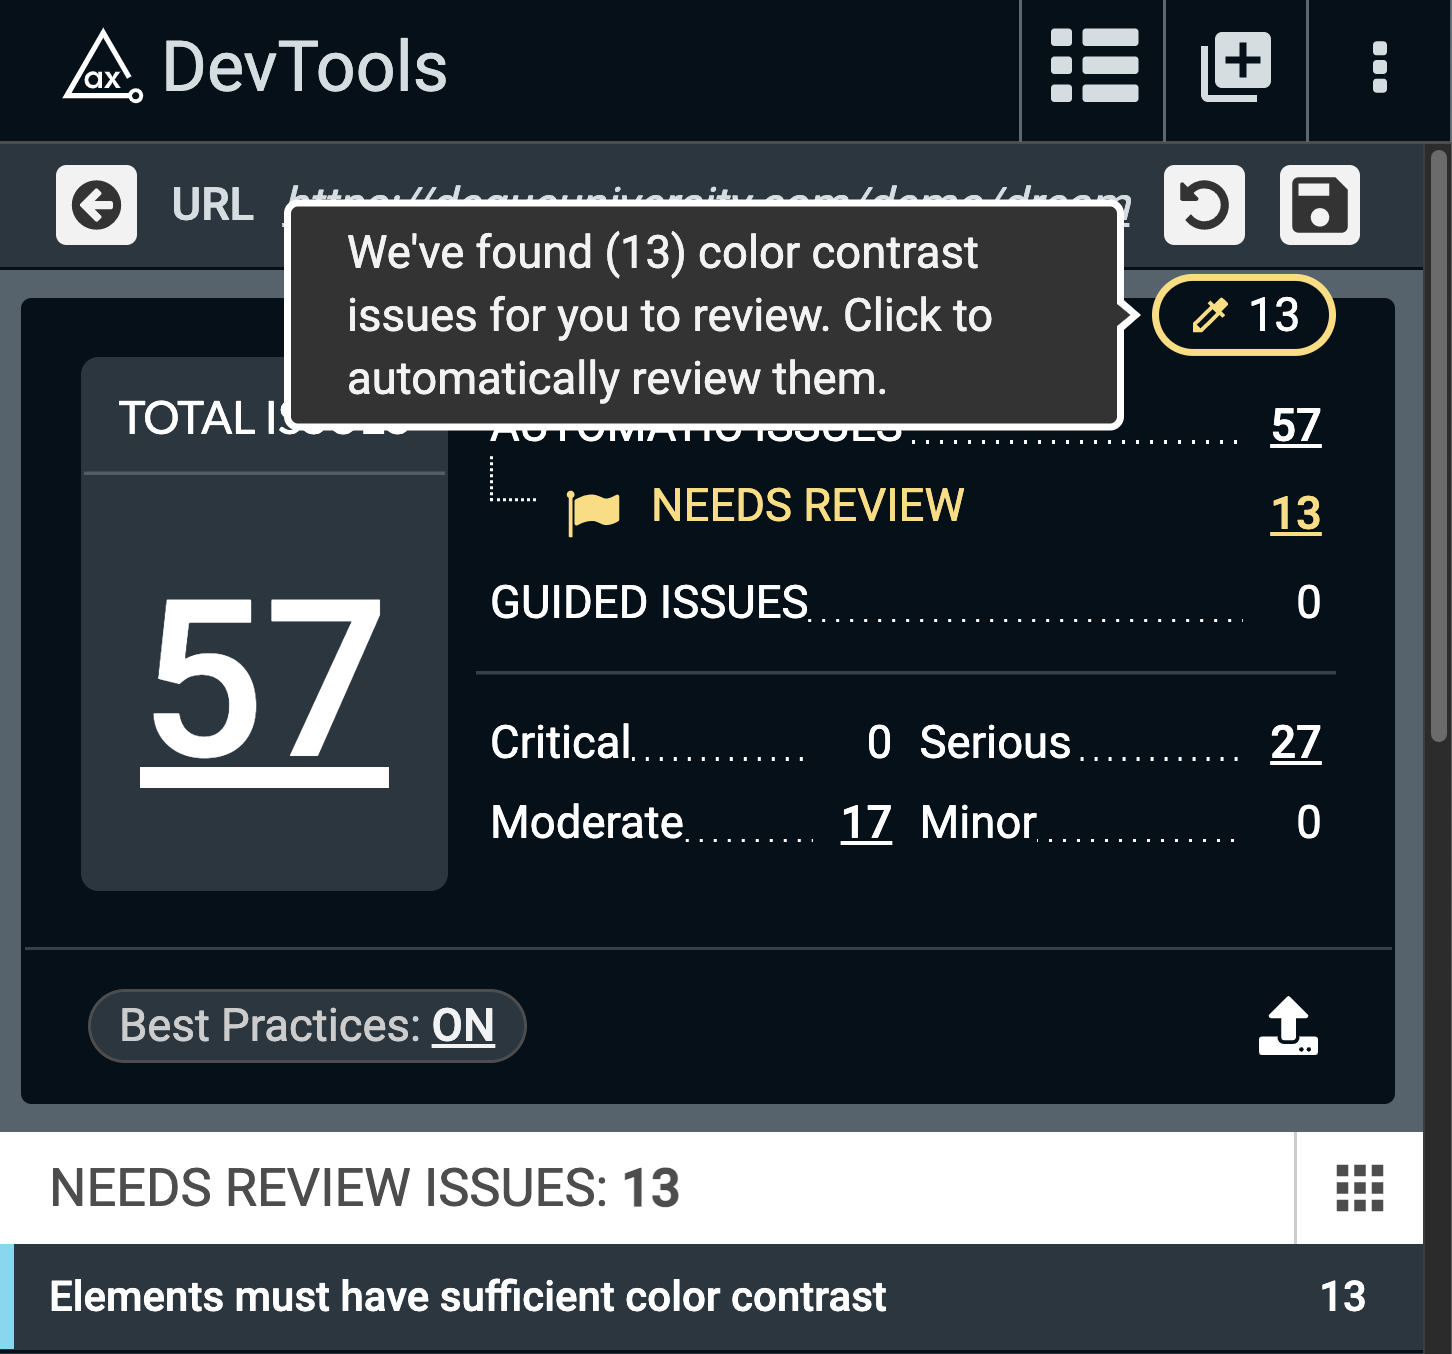 Screenshot of the axe DevTools extension displaying a button tooltip that states "We've found (13) color contrast issues for you to review. Click to automatically review them”.